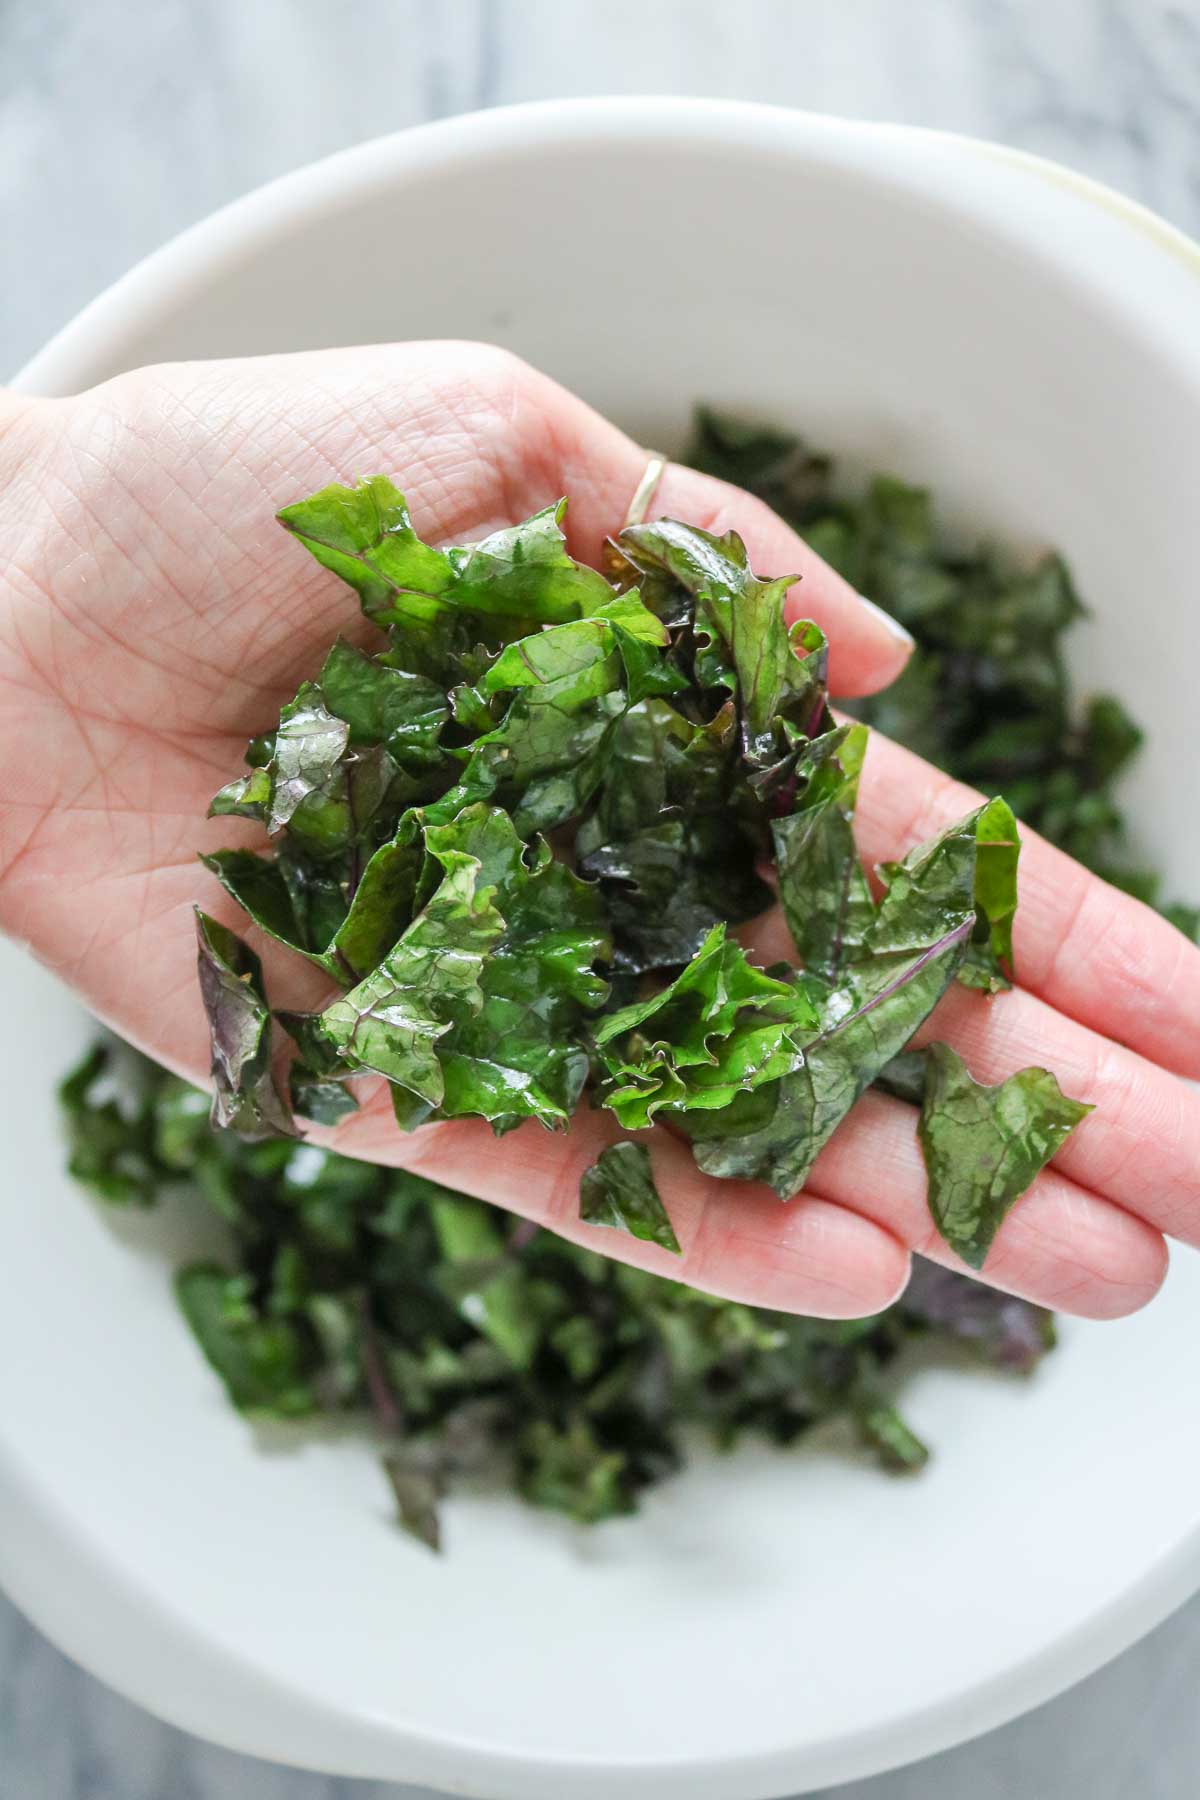 Hand holding chopped kale after it has been massaged.